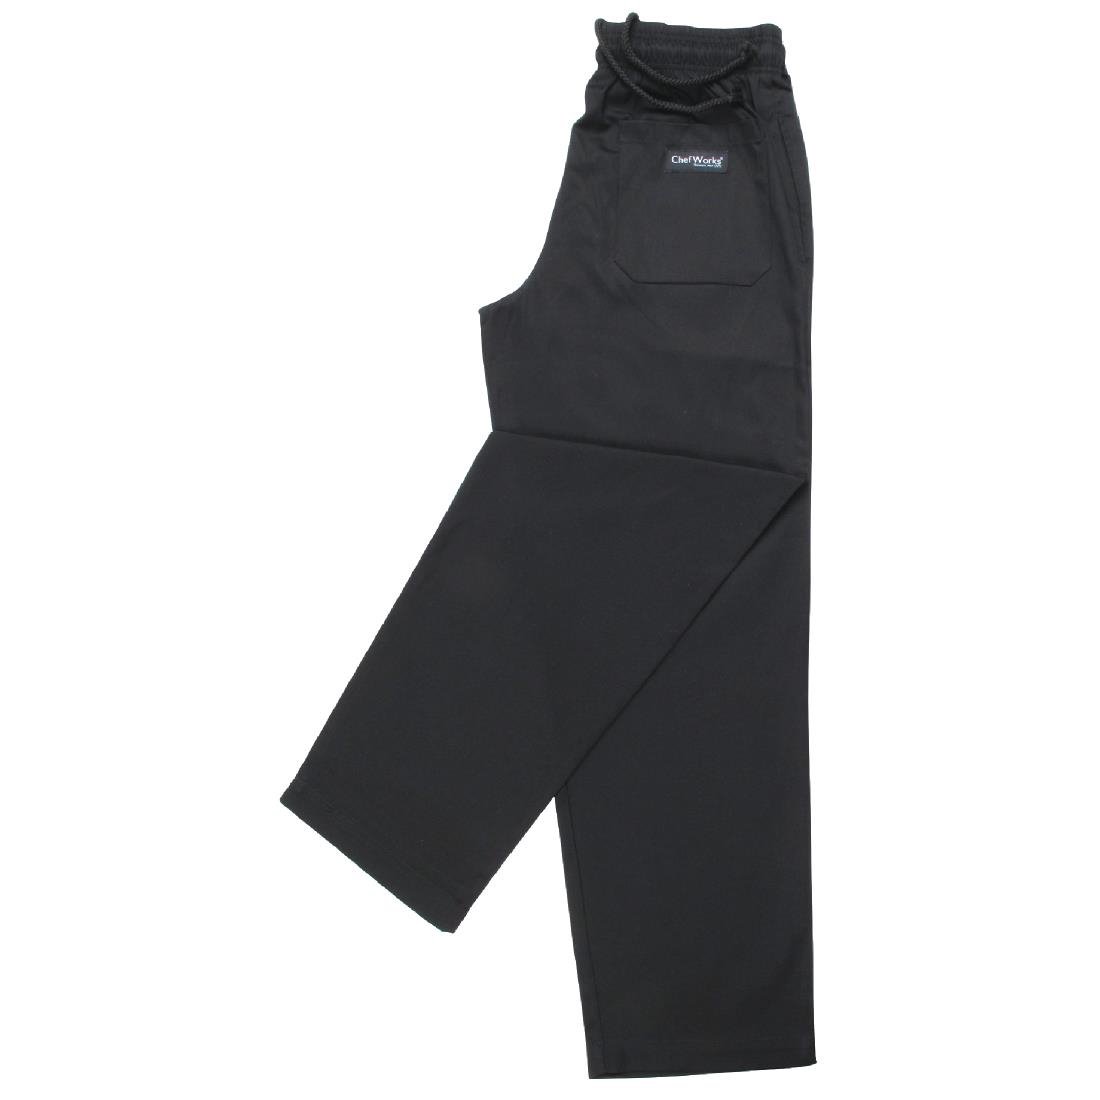 A029-7XL Chef Works Essential Baggy Trousers Black 7XL